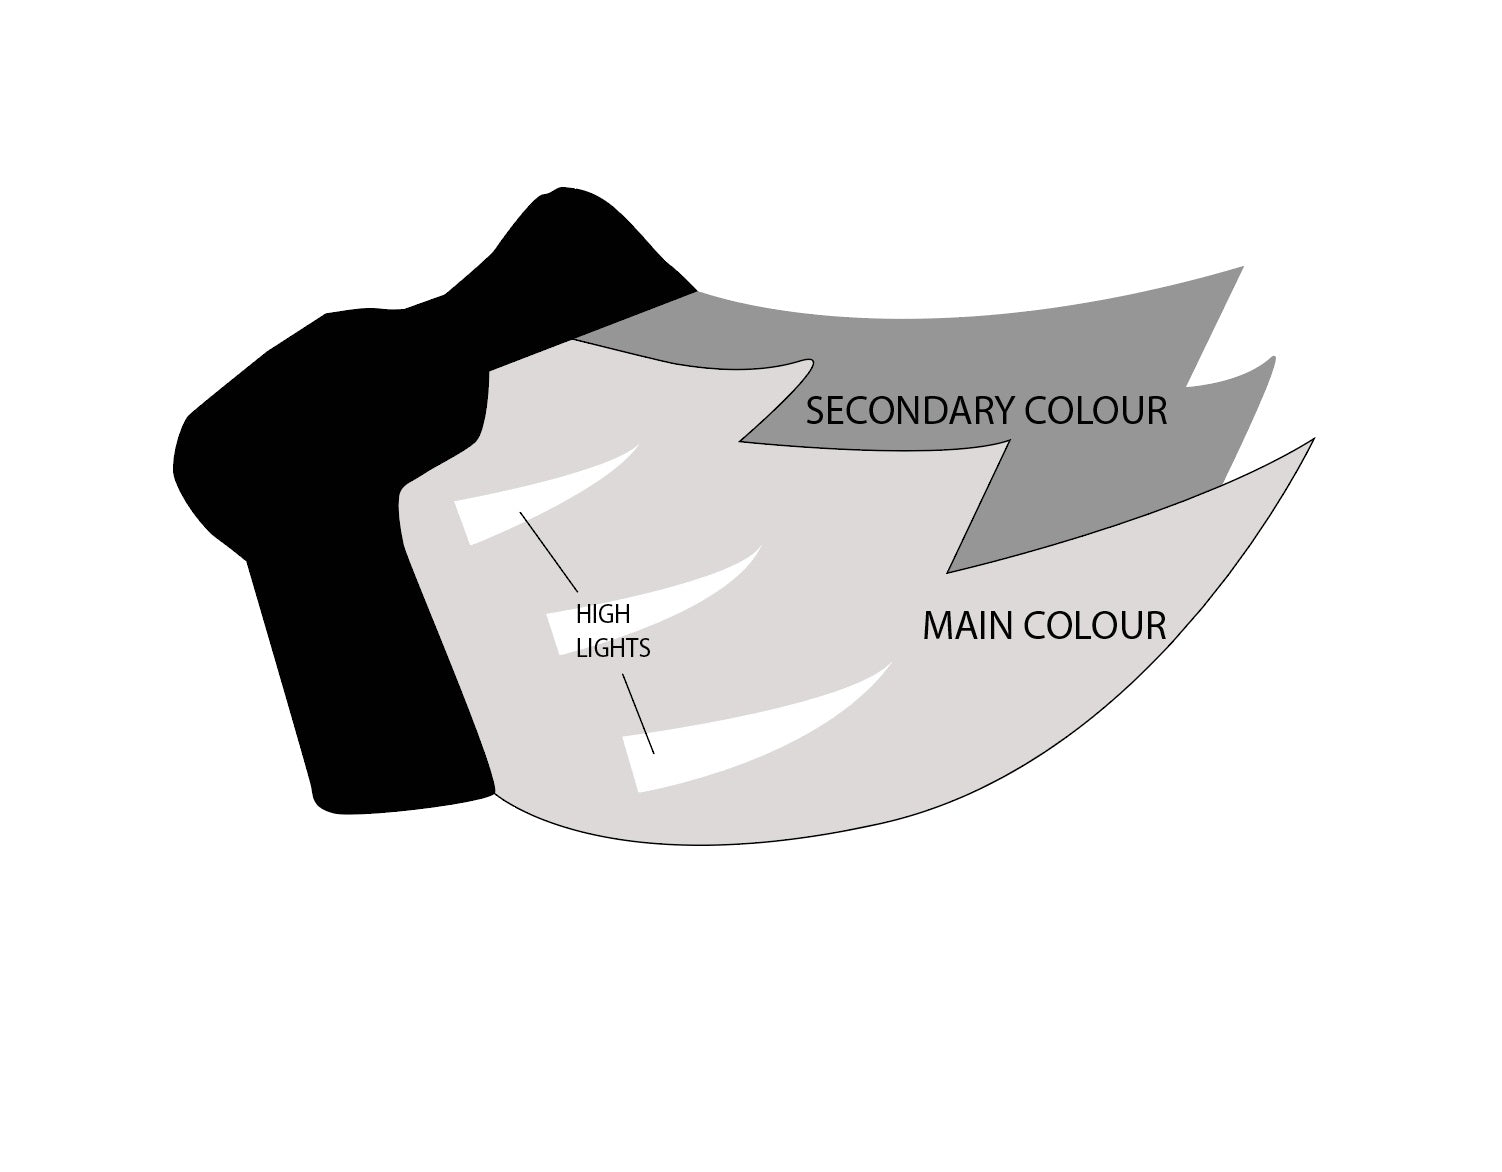 An illustration showing where the main and secondary colors, and where the highlight colors are on the Neoprene Snap-On K-Wolf Muzzle.